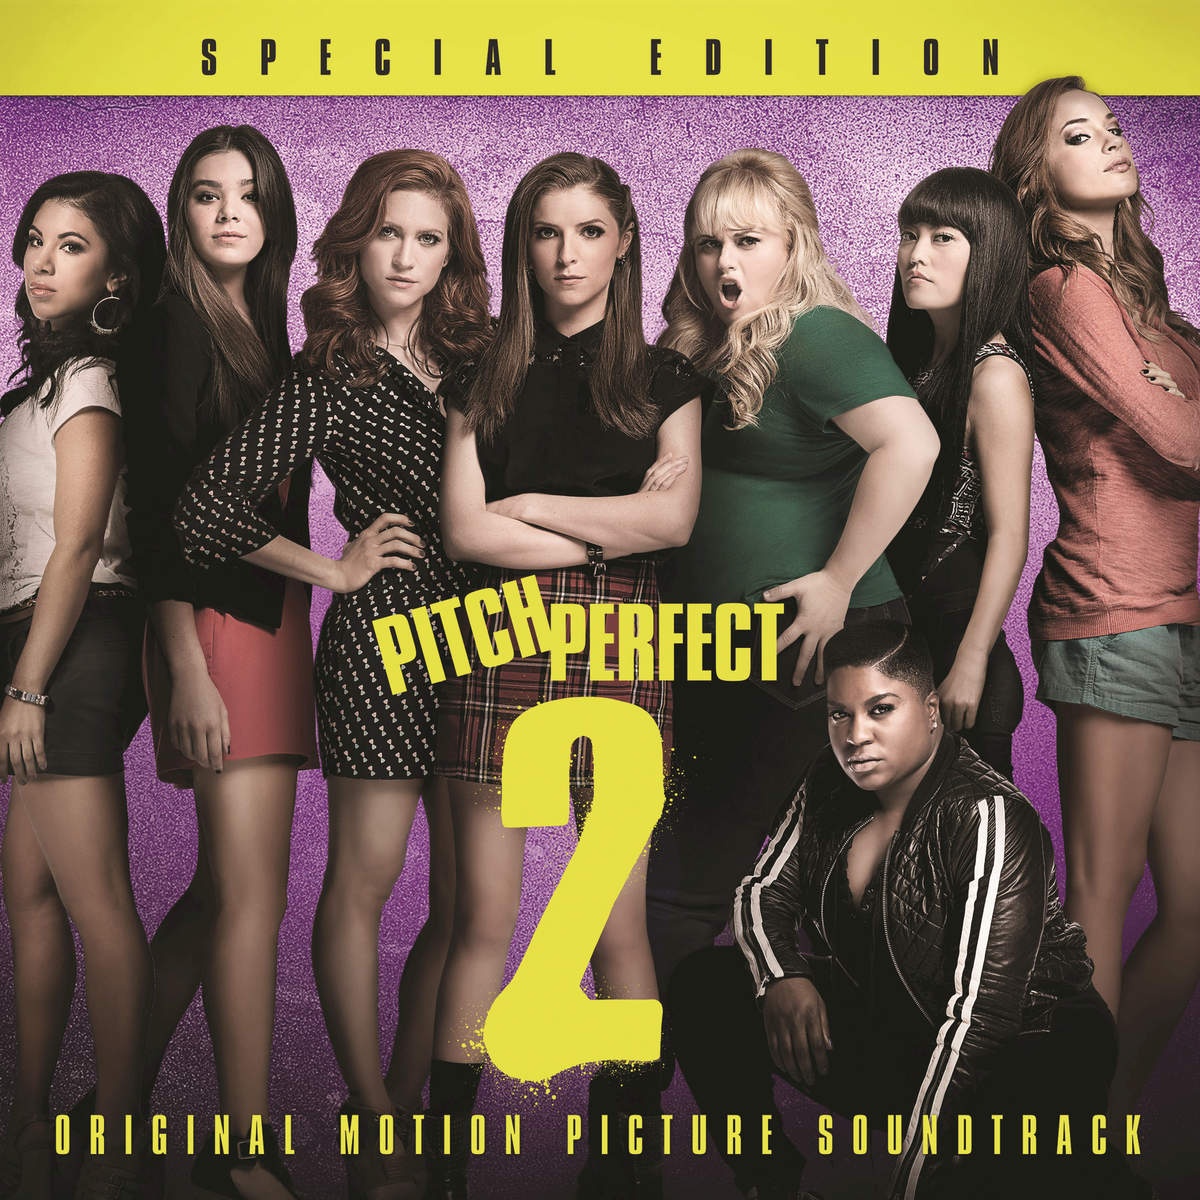 Jungle (From "Pitch Perfect 2" Soundtrack)